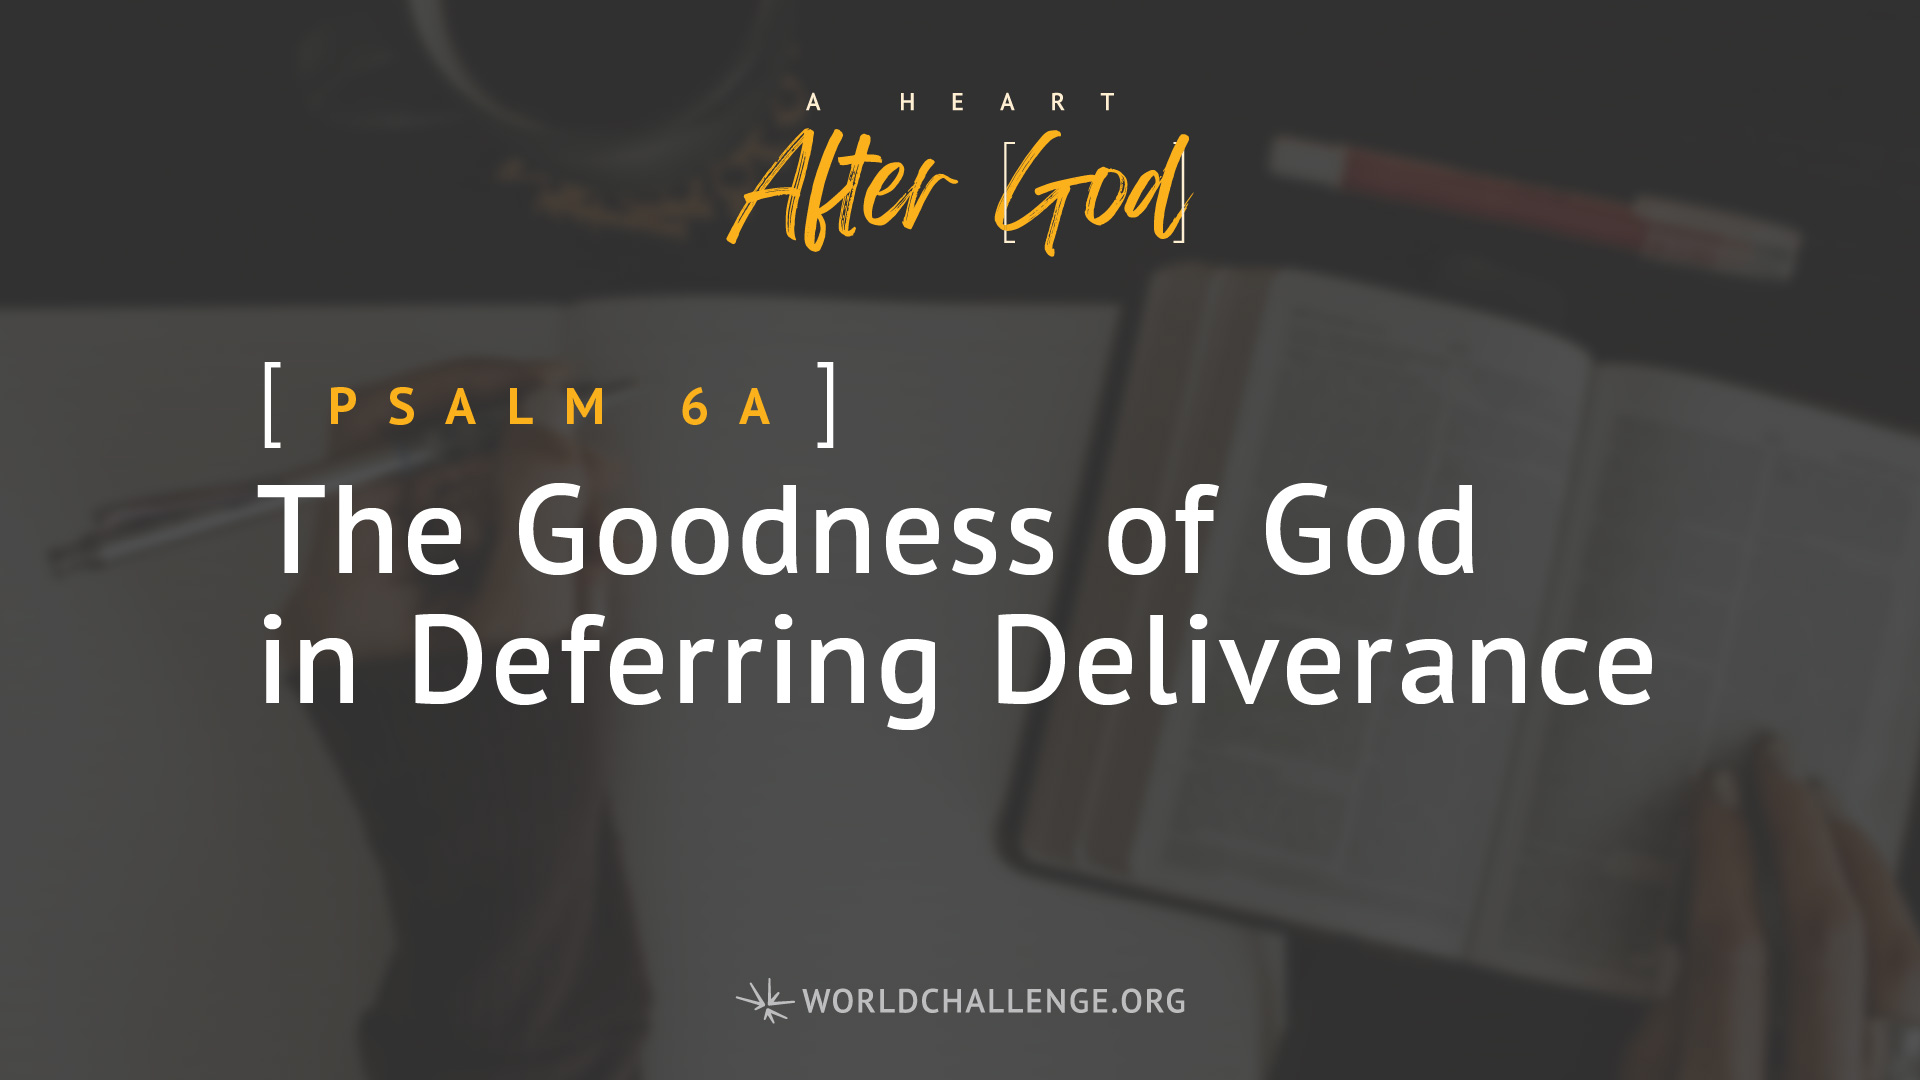 Psalm 6a - The Goodness of God in Deferring Deliverance